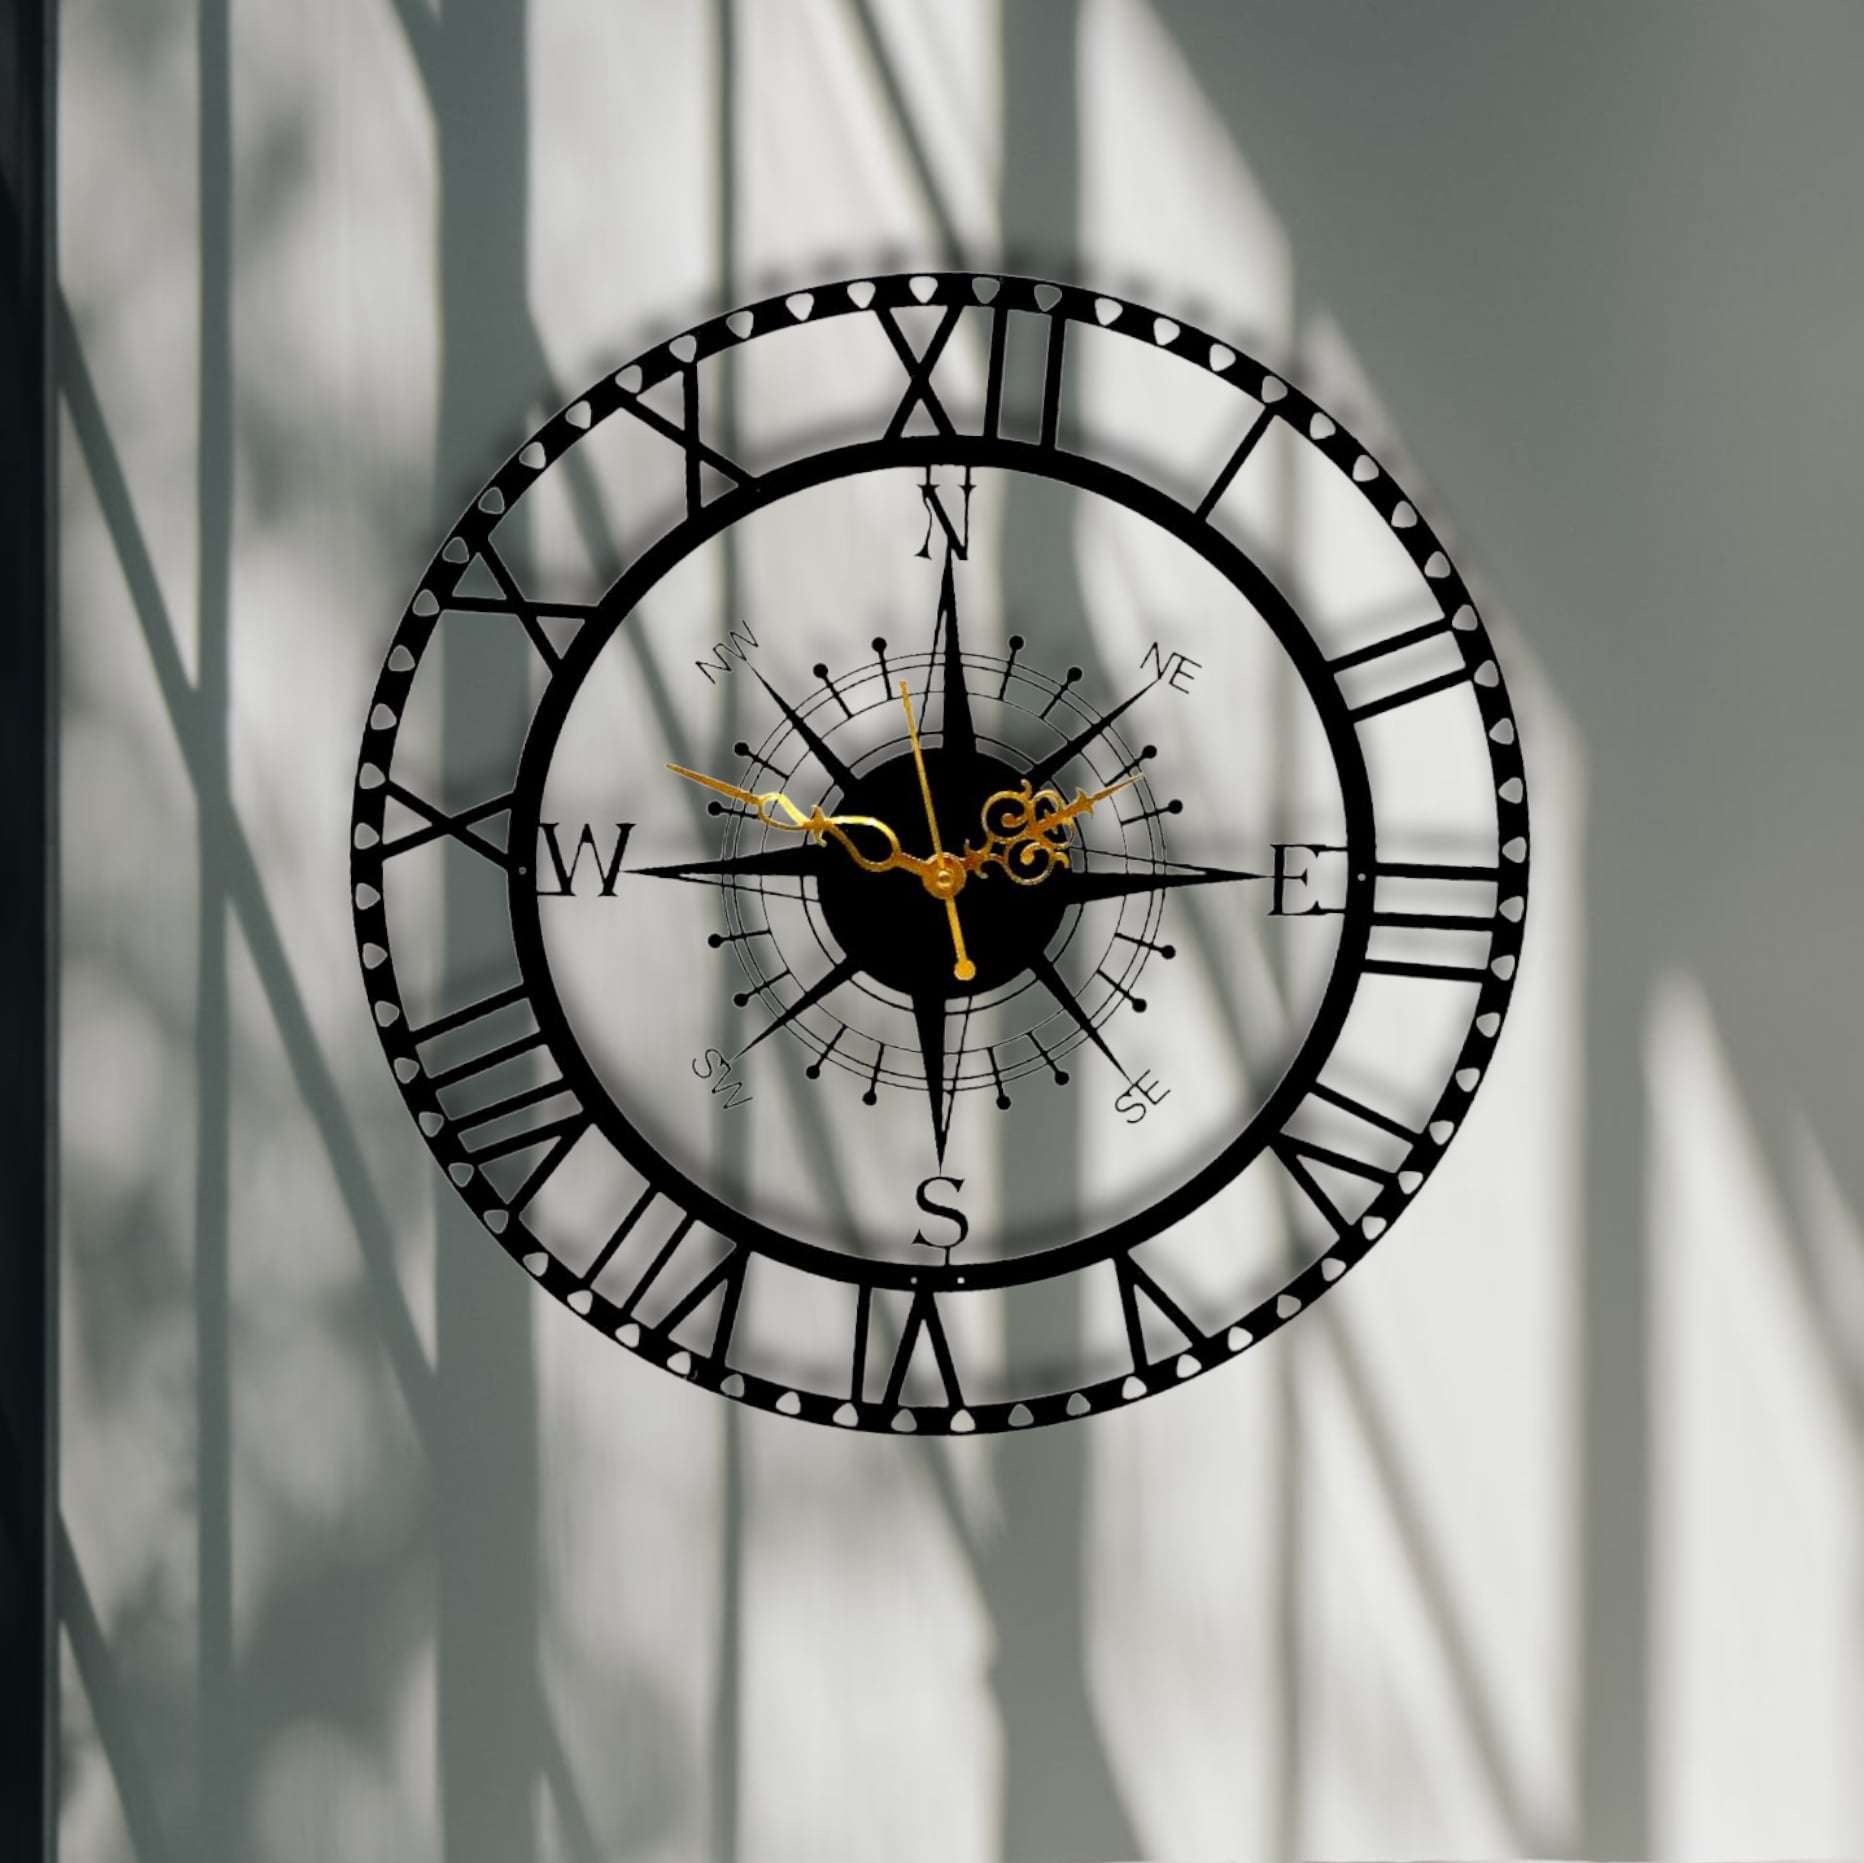 Tips on Picking the Perfect Wall Clock for a Modern Home Decor